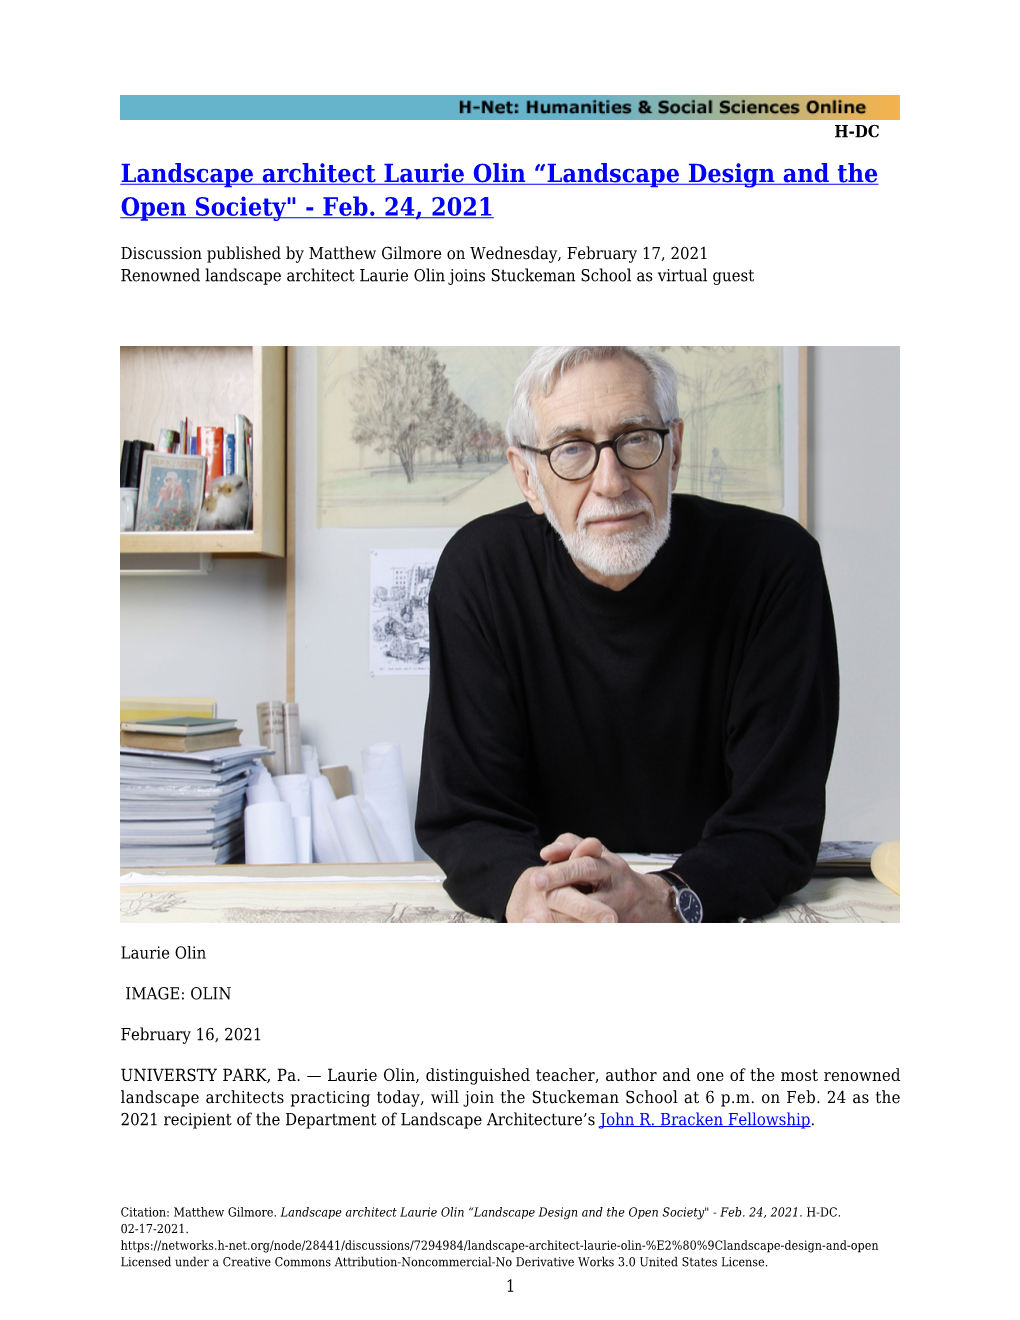 Landscape Architect Laurie Olin “Landscape Design and the Open Society" - Feb